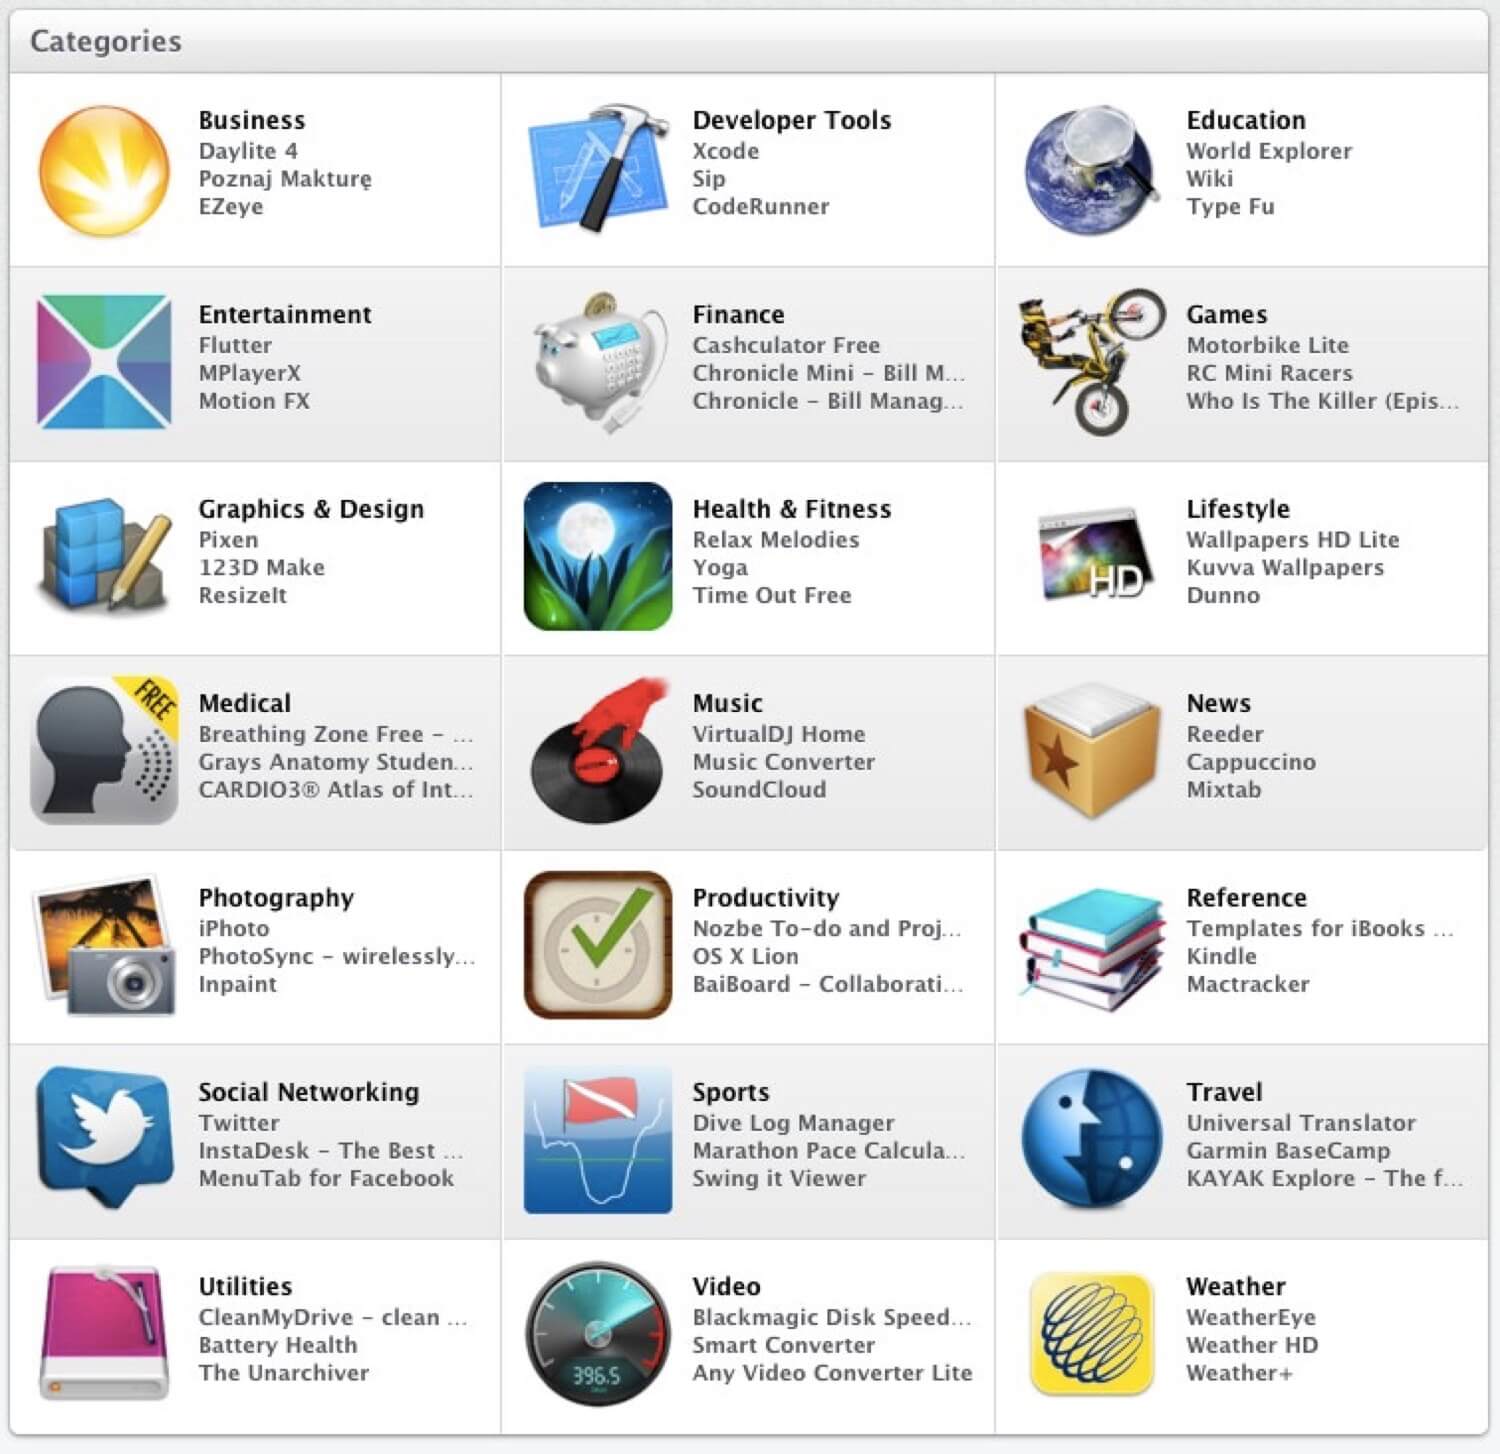 Nozbe means Productivity on the Mac App Store